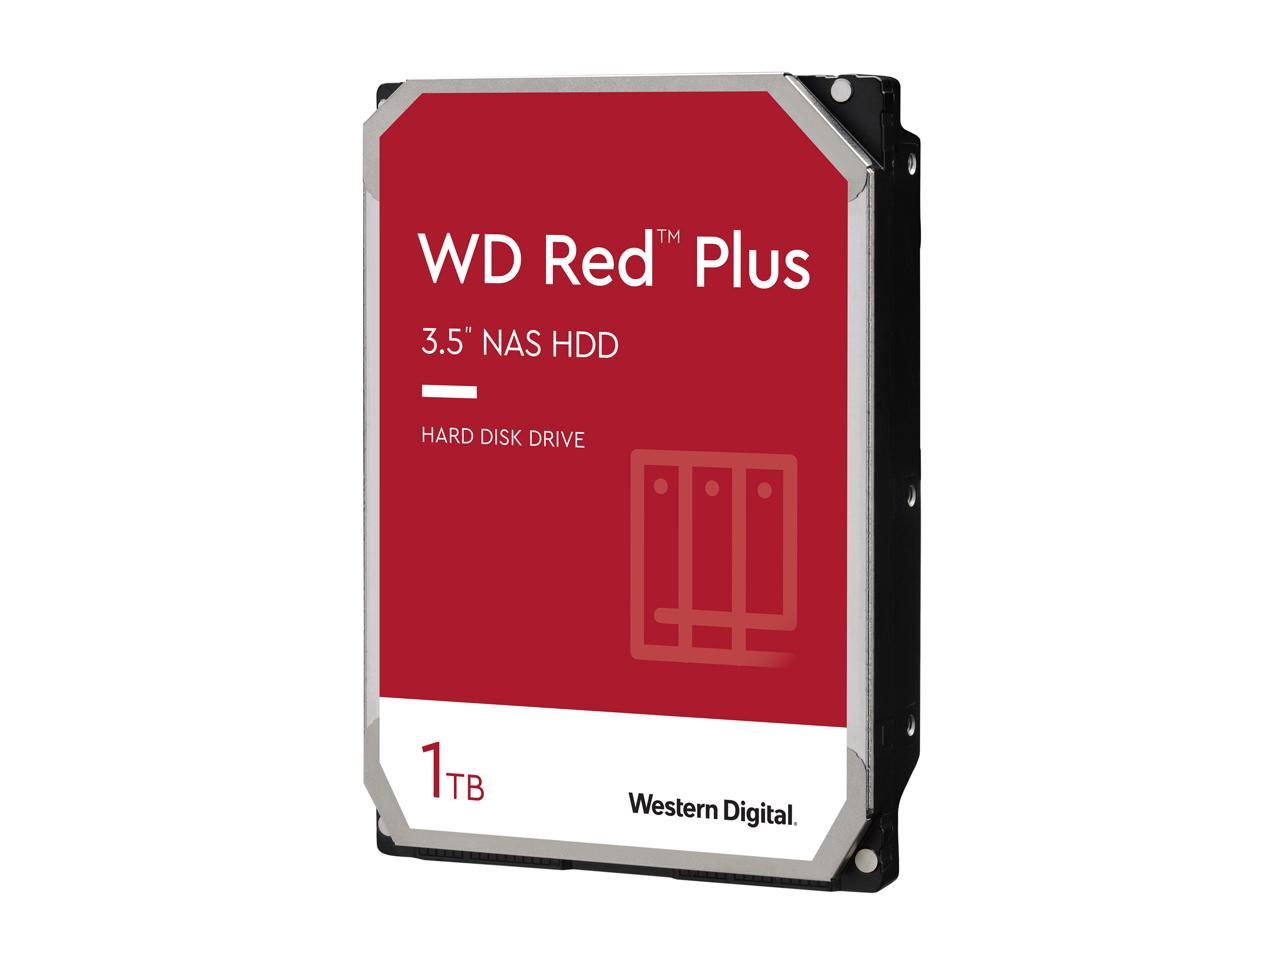 Wd Red Plus 1Tb Nas Hard Disk Drive - 5400 Rpm Class Sata 6Gb/S, Cmr, 64Mb Cache, 3.5 Inch - Wd10Efrx